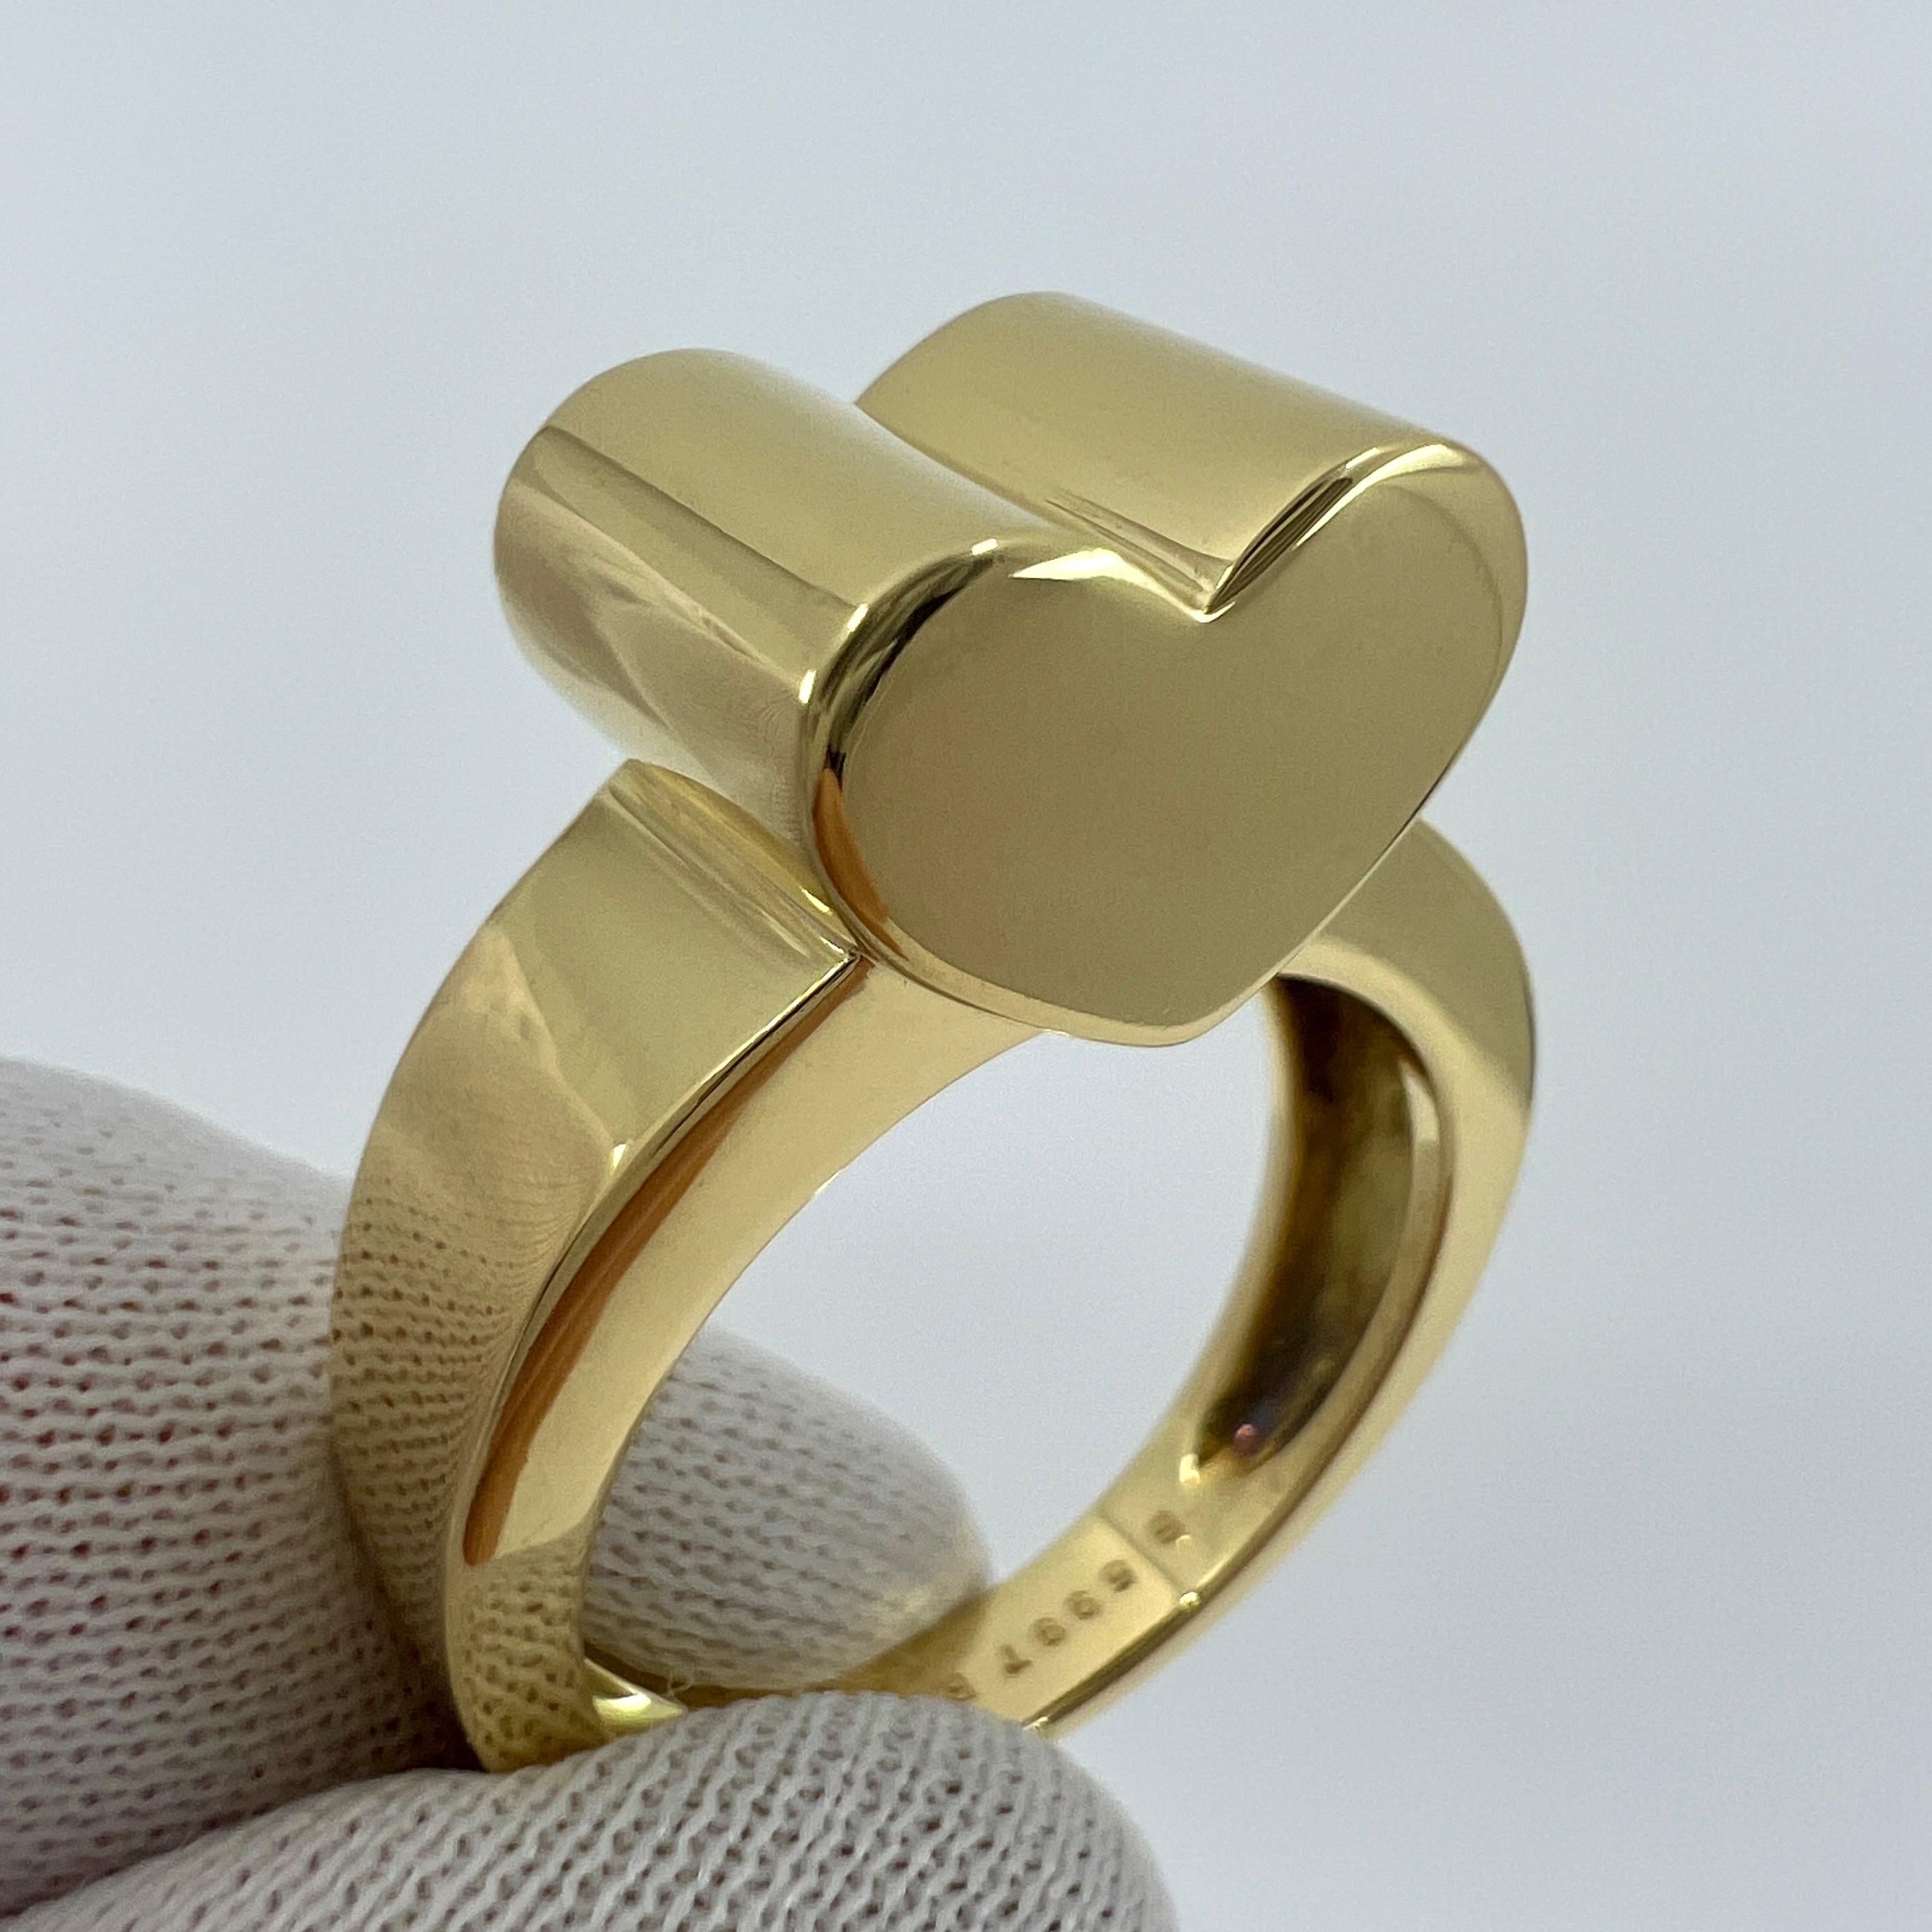 Rare Vintage Van Cleef & Arpels 18k Yellow Gold Heart Love Motif Ring.

A vintage Van Cleef & Arpels ring with a bold heart motif.

This large love heart sits approximately 7mm above the finger and is 11m wide x 8.5mm long. A bold statement piece.